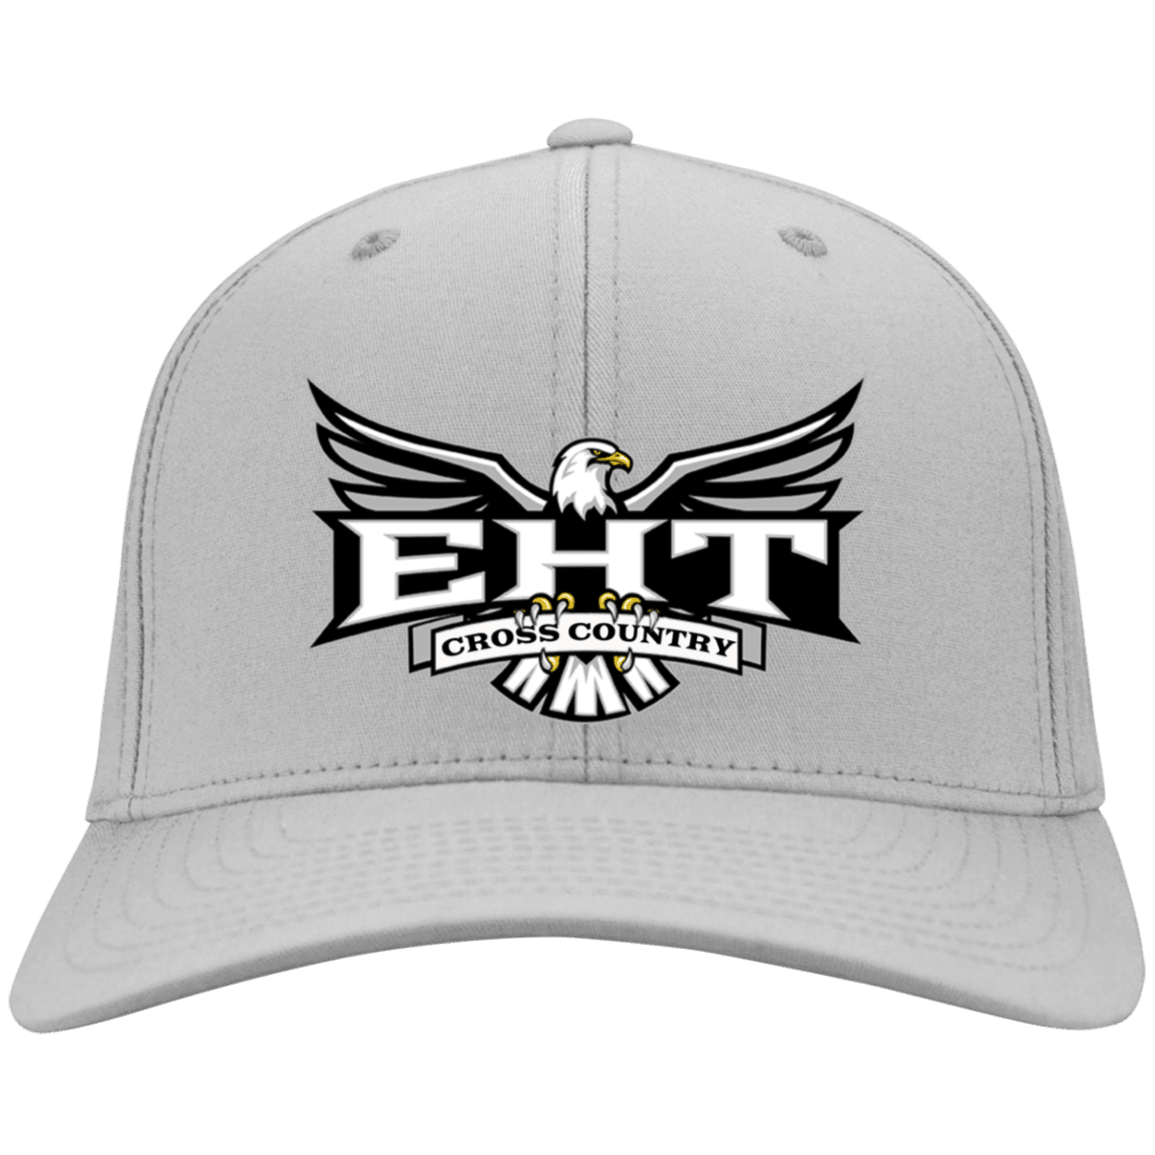 EHTXC Embroidered Twill Cap